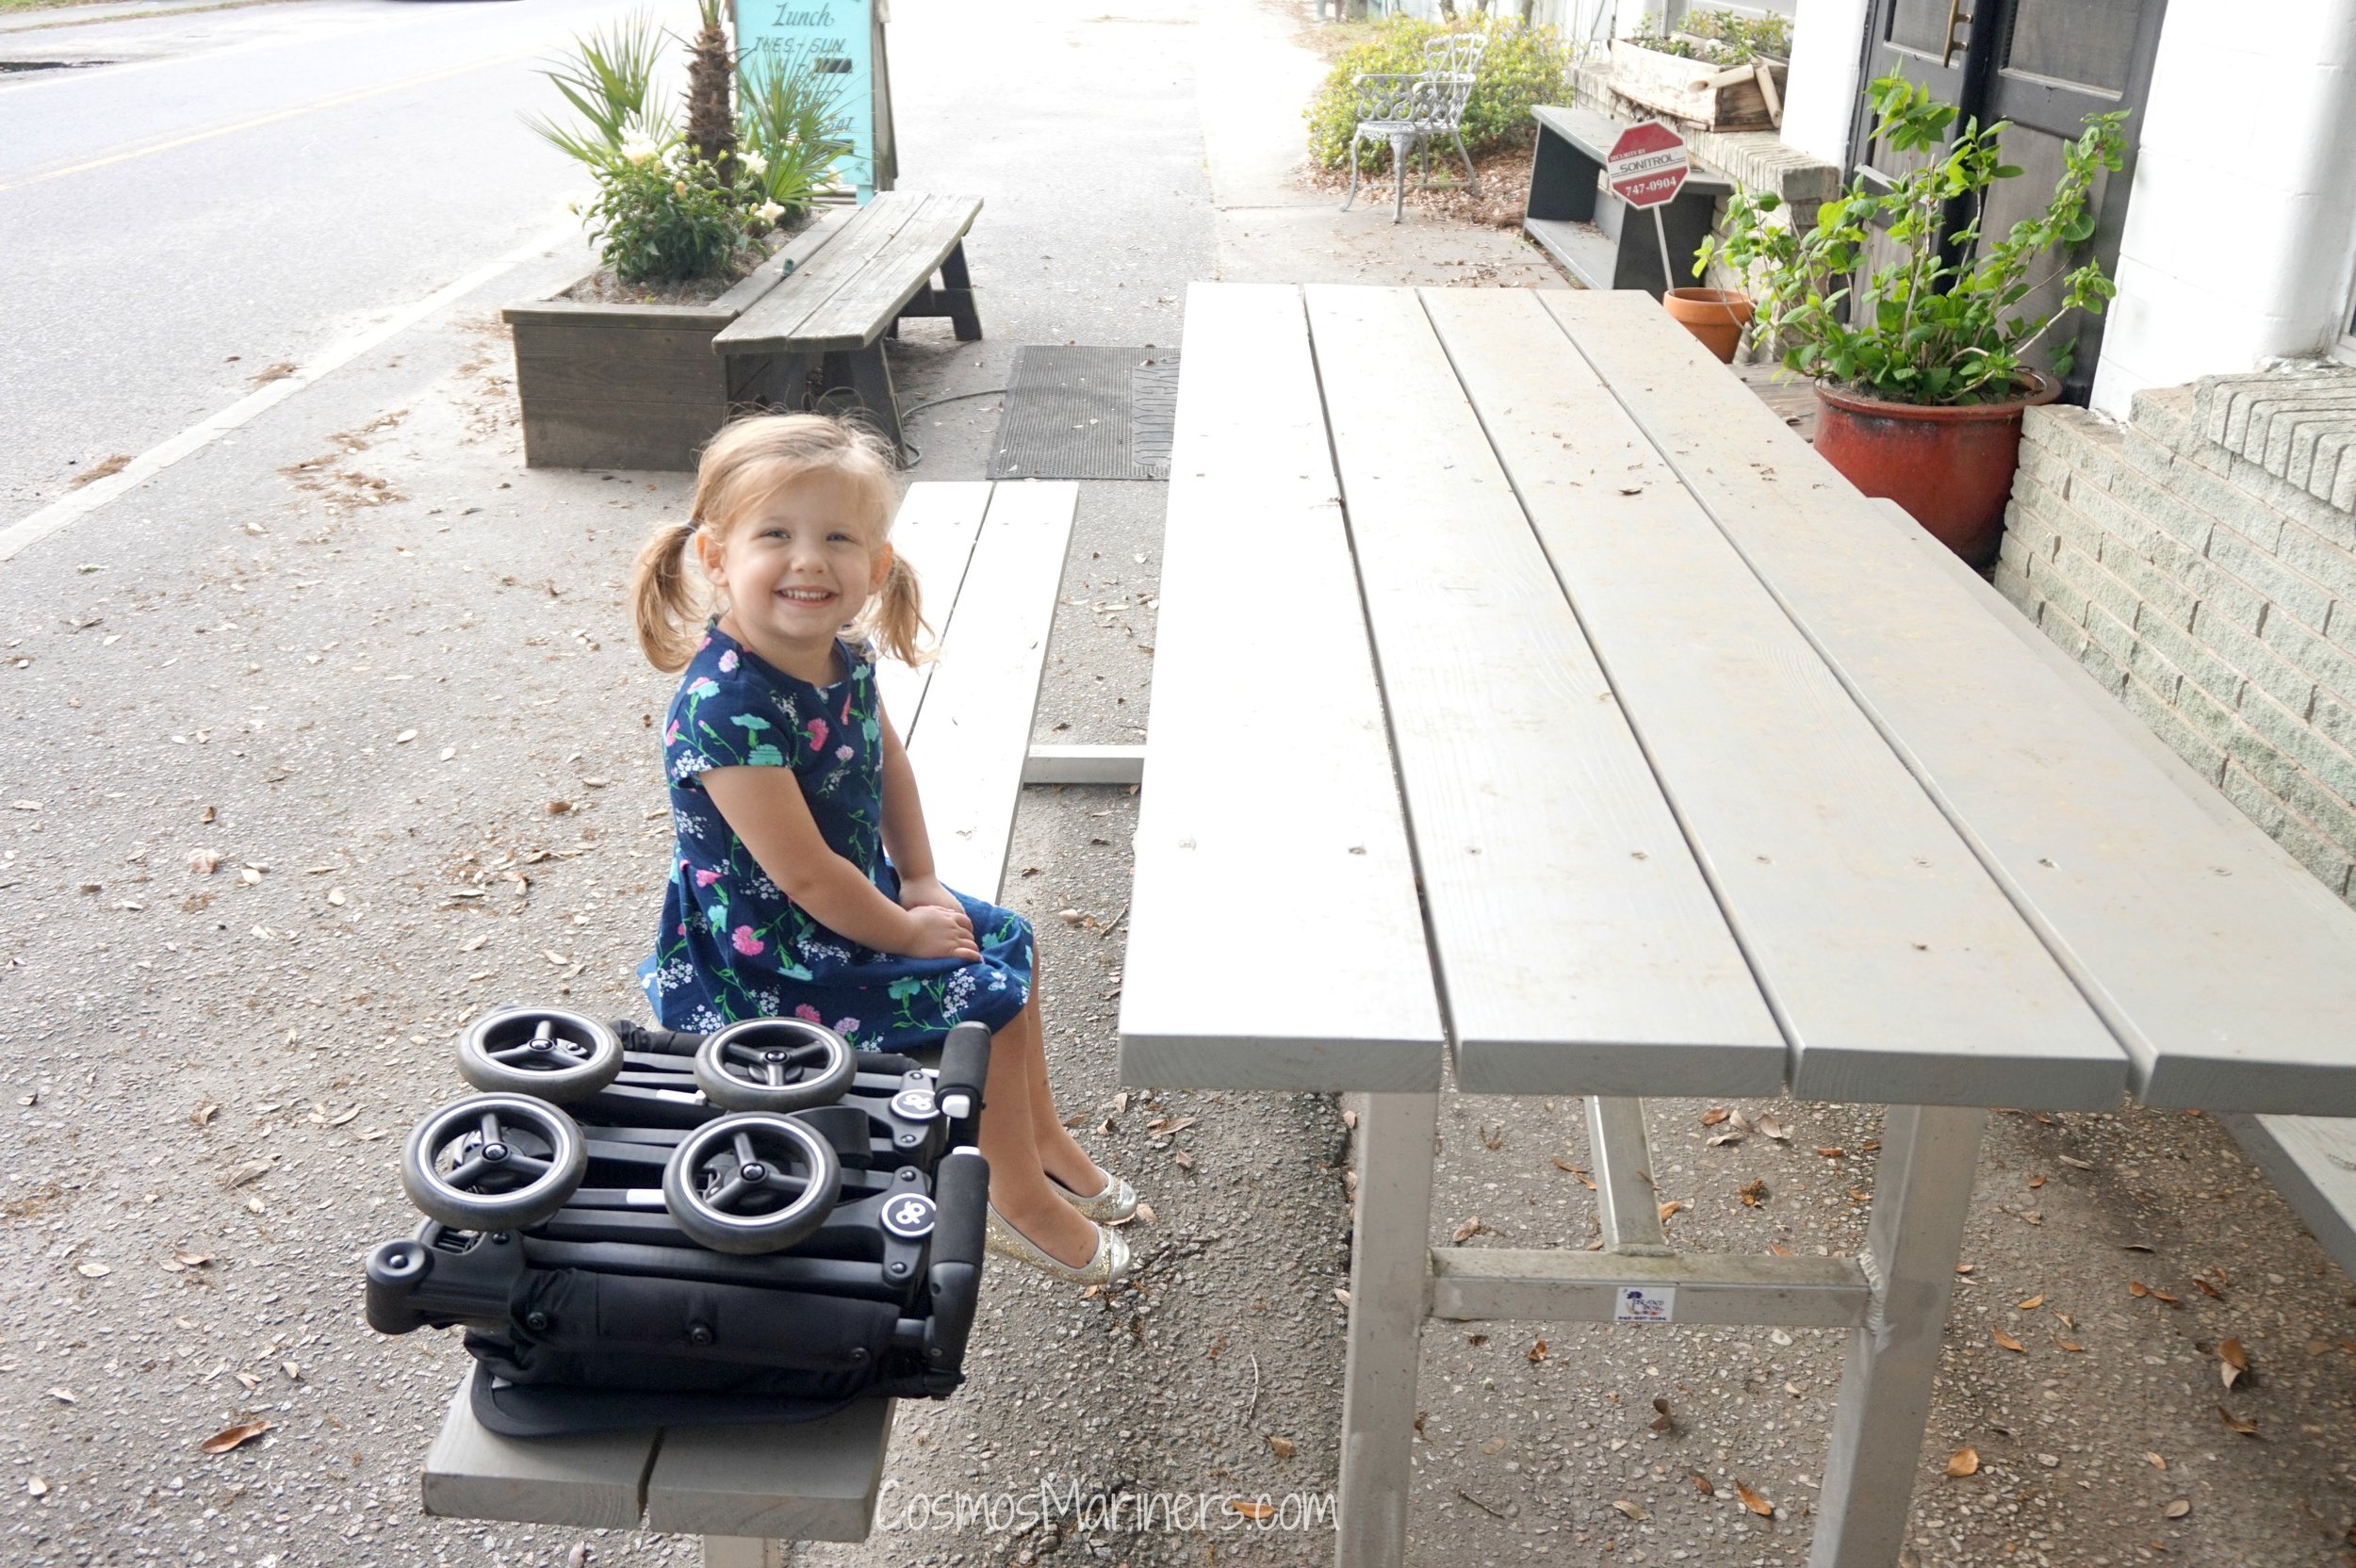 GB Pockit Stroller Review: Is Smallest Fold Always Best?